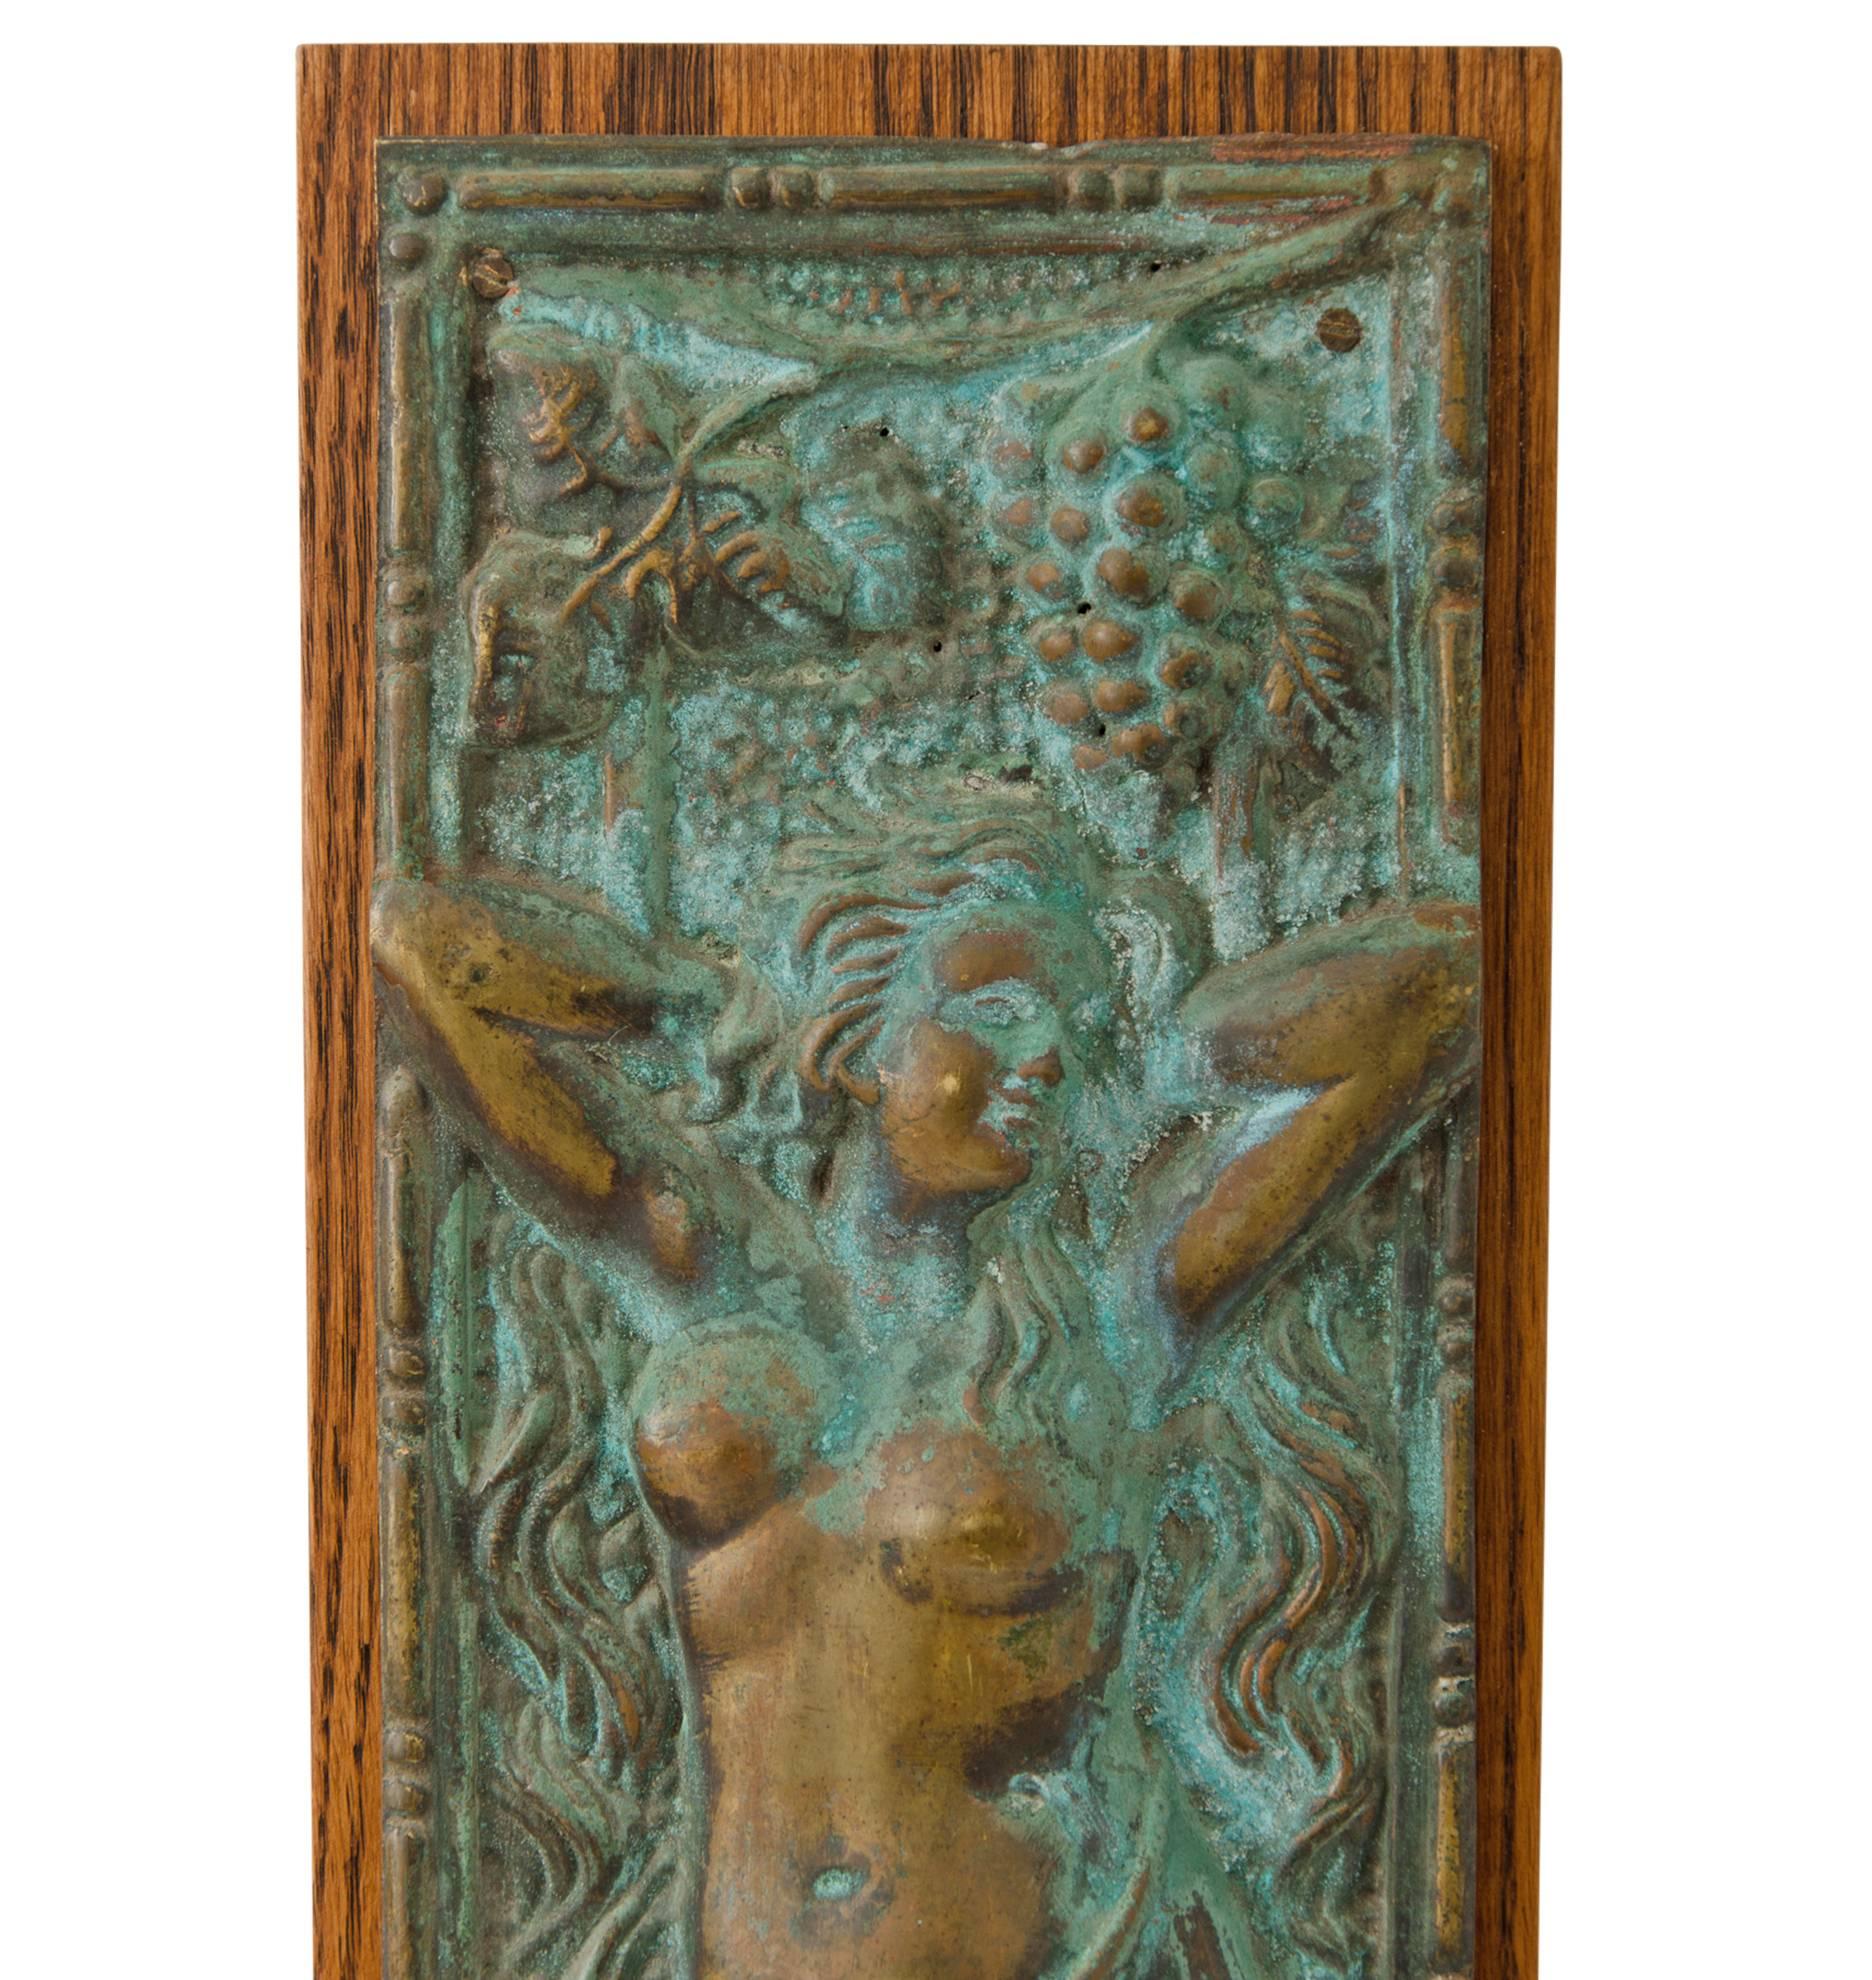 Perhaps salvaged from a larger facade or door, this small cast brass panel features a Grecian figure, Aphrodite-esque, standing atop a seashell and surrounded by grapes and grape leaves. Mounted on a piece of oak, she makes a lovely decorative